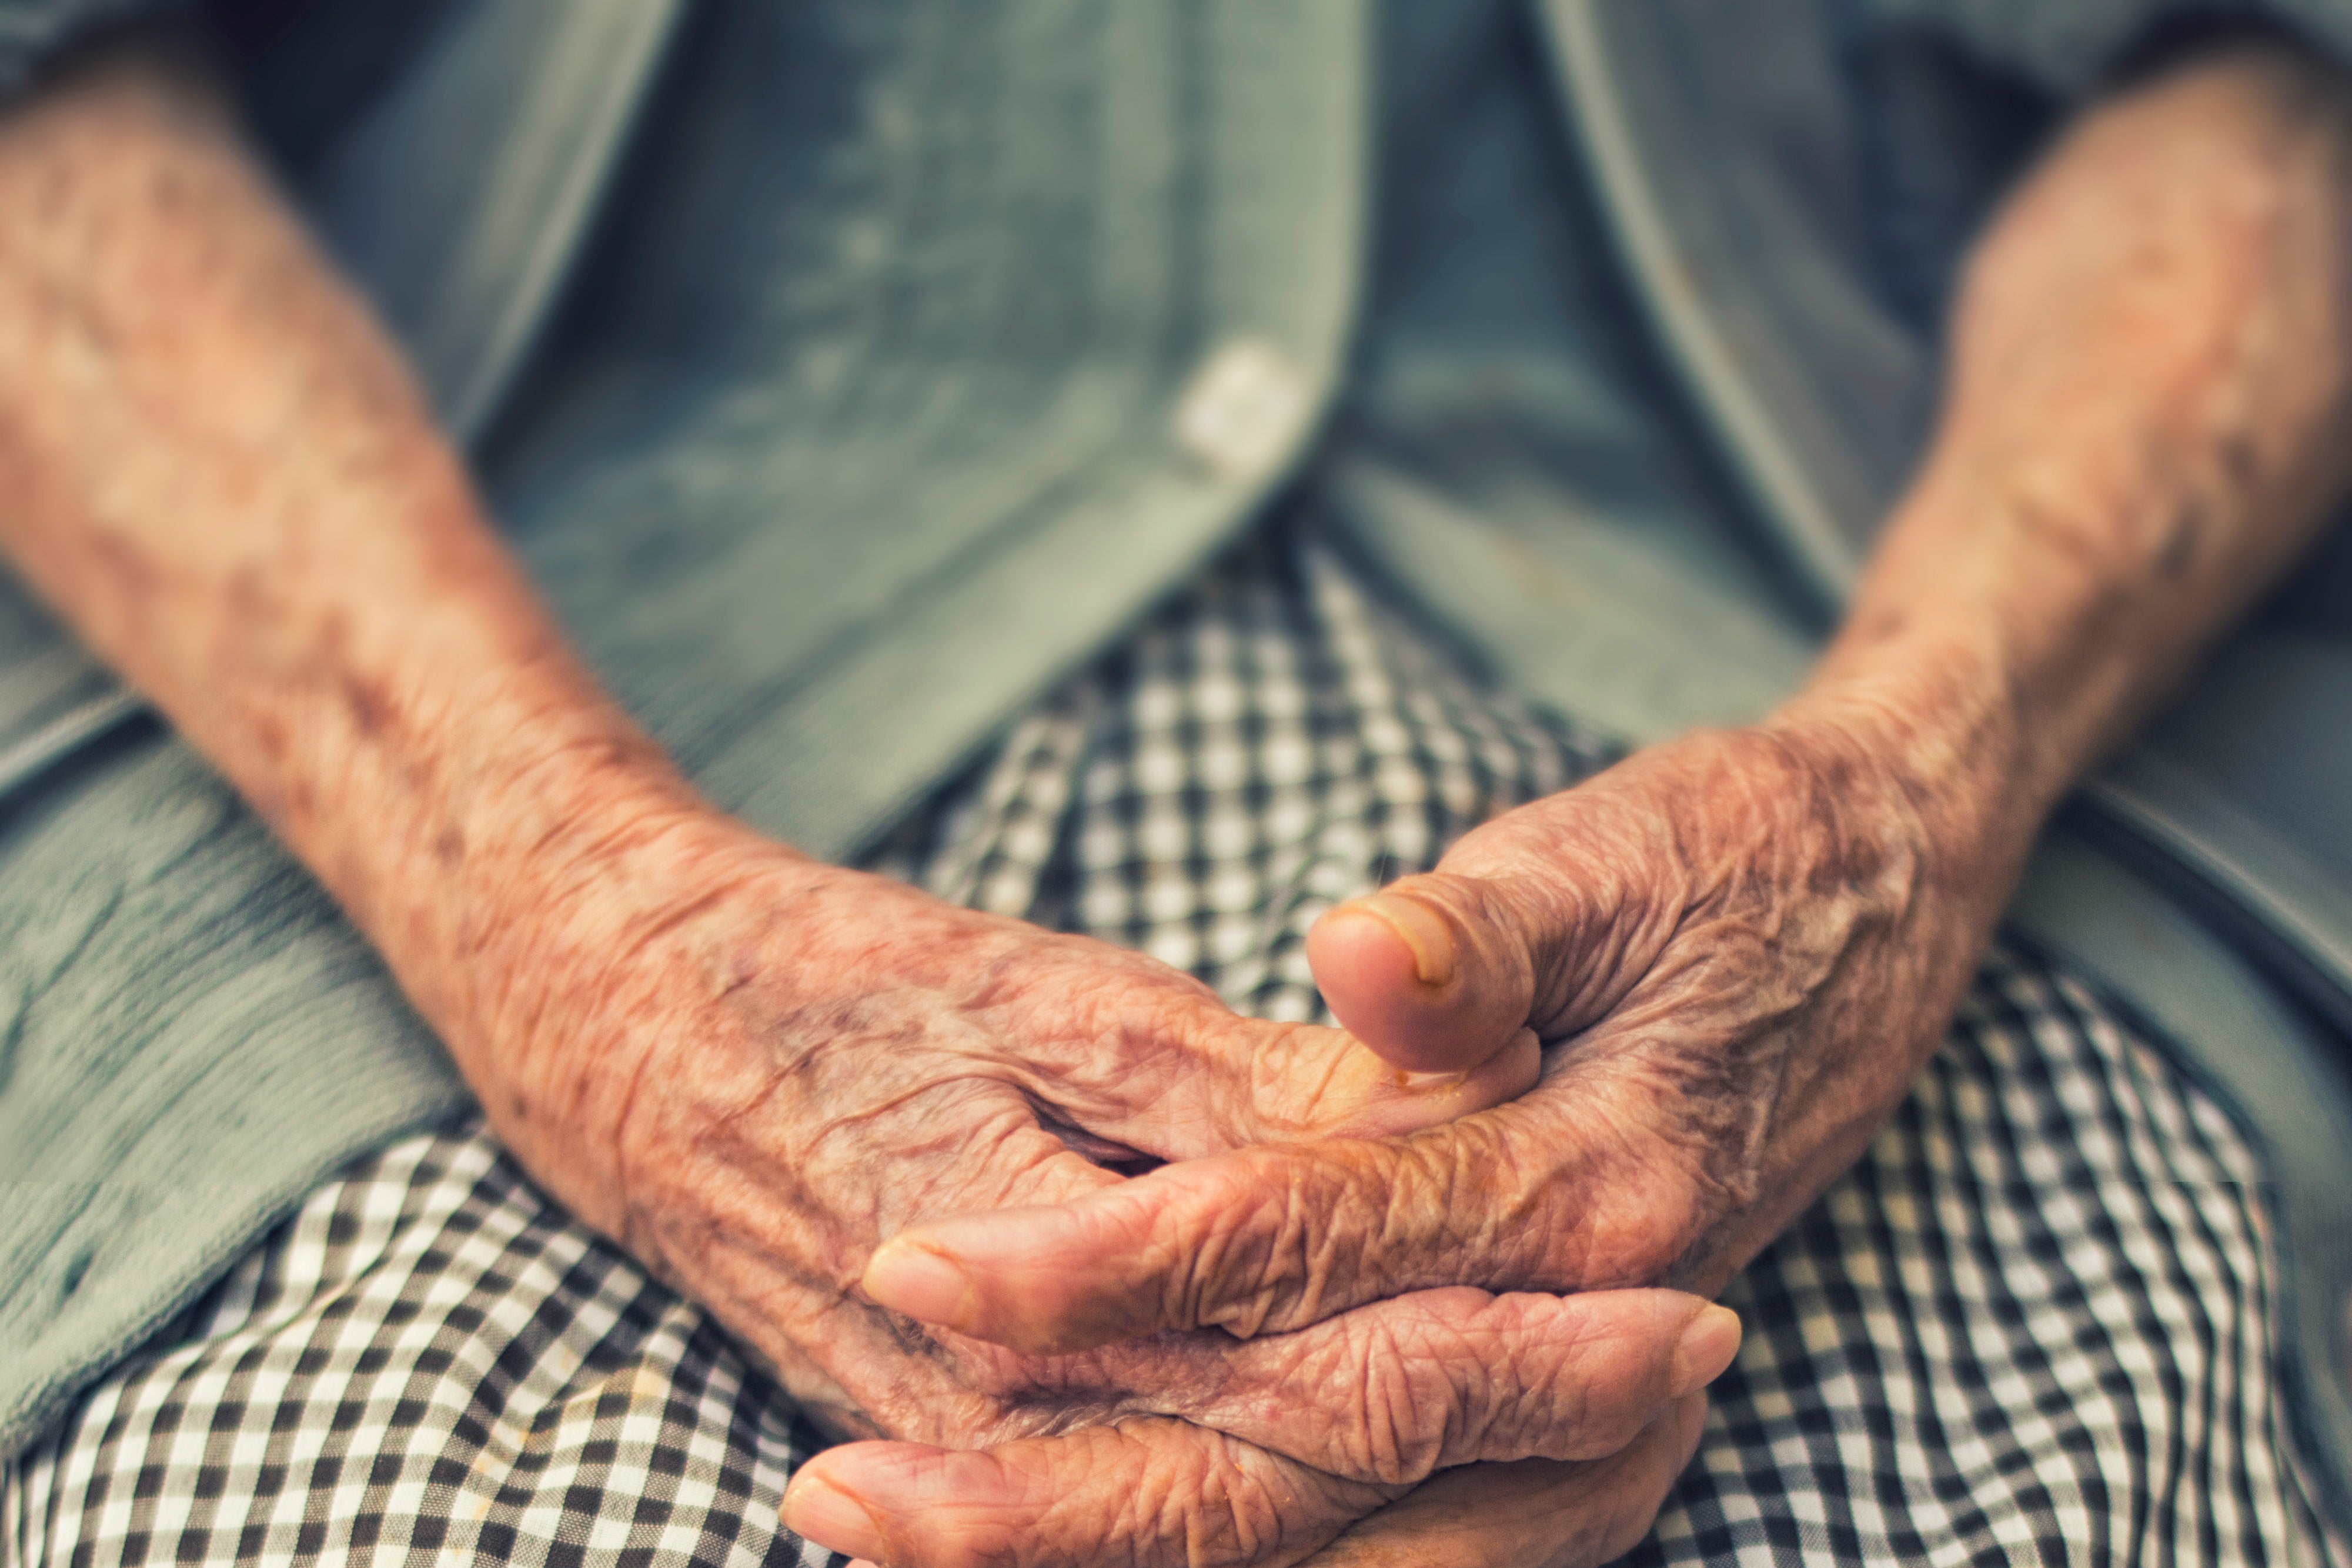 An elderly person's hands clasped on their lap